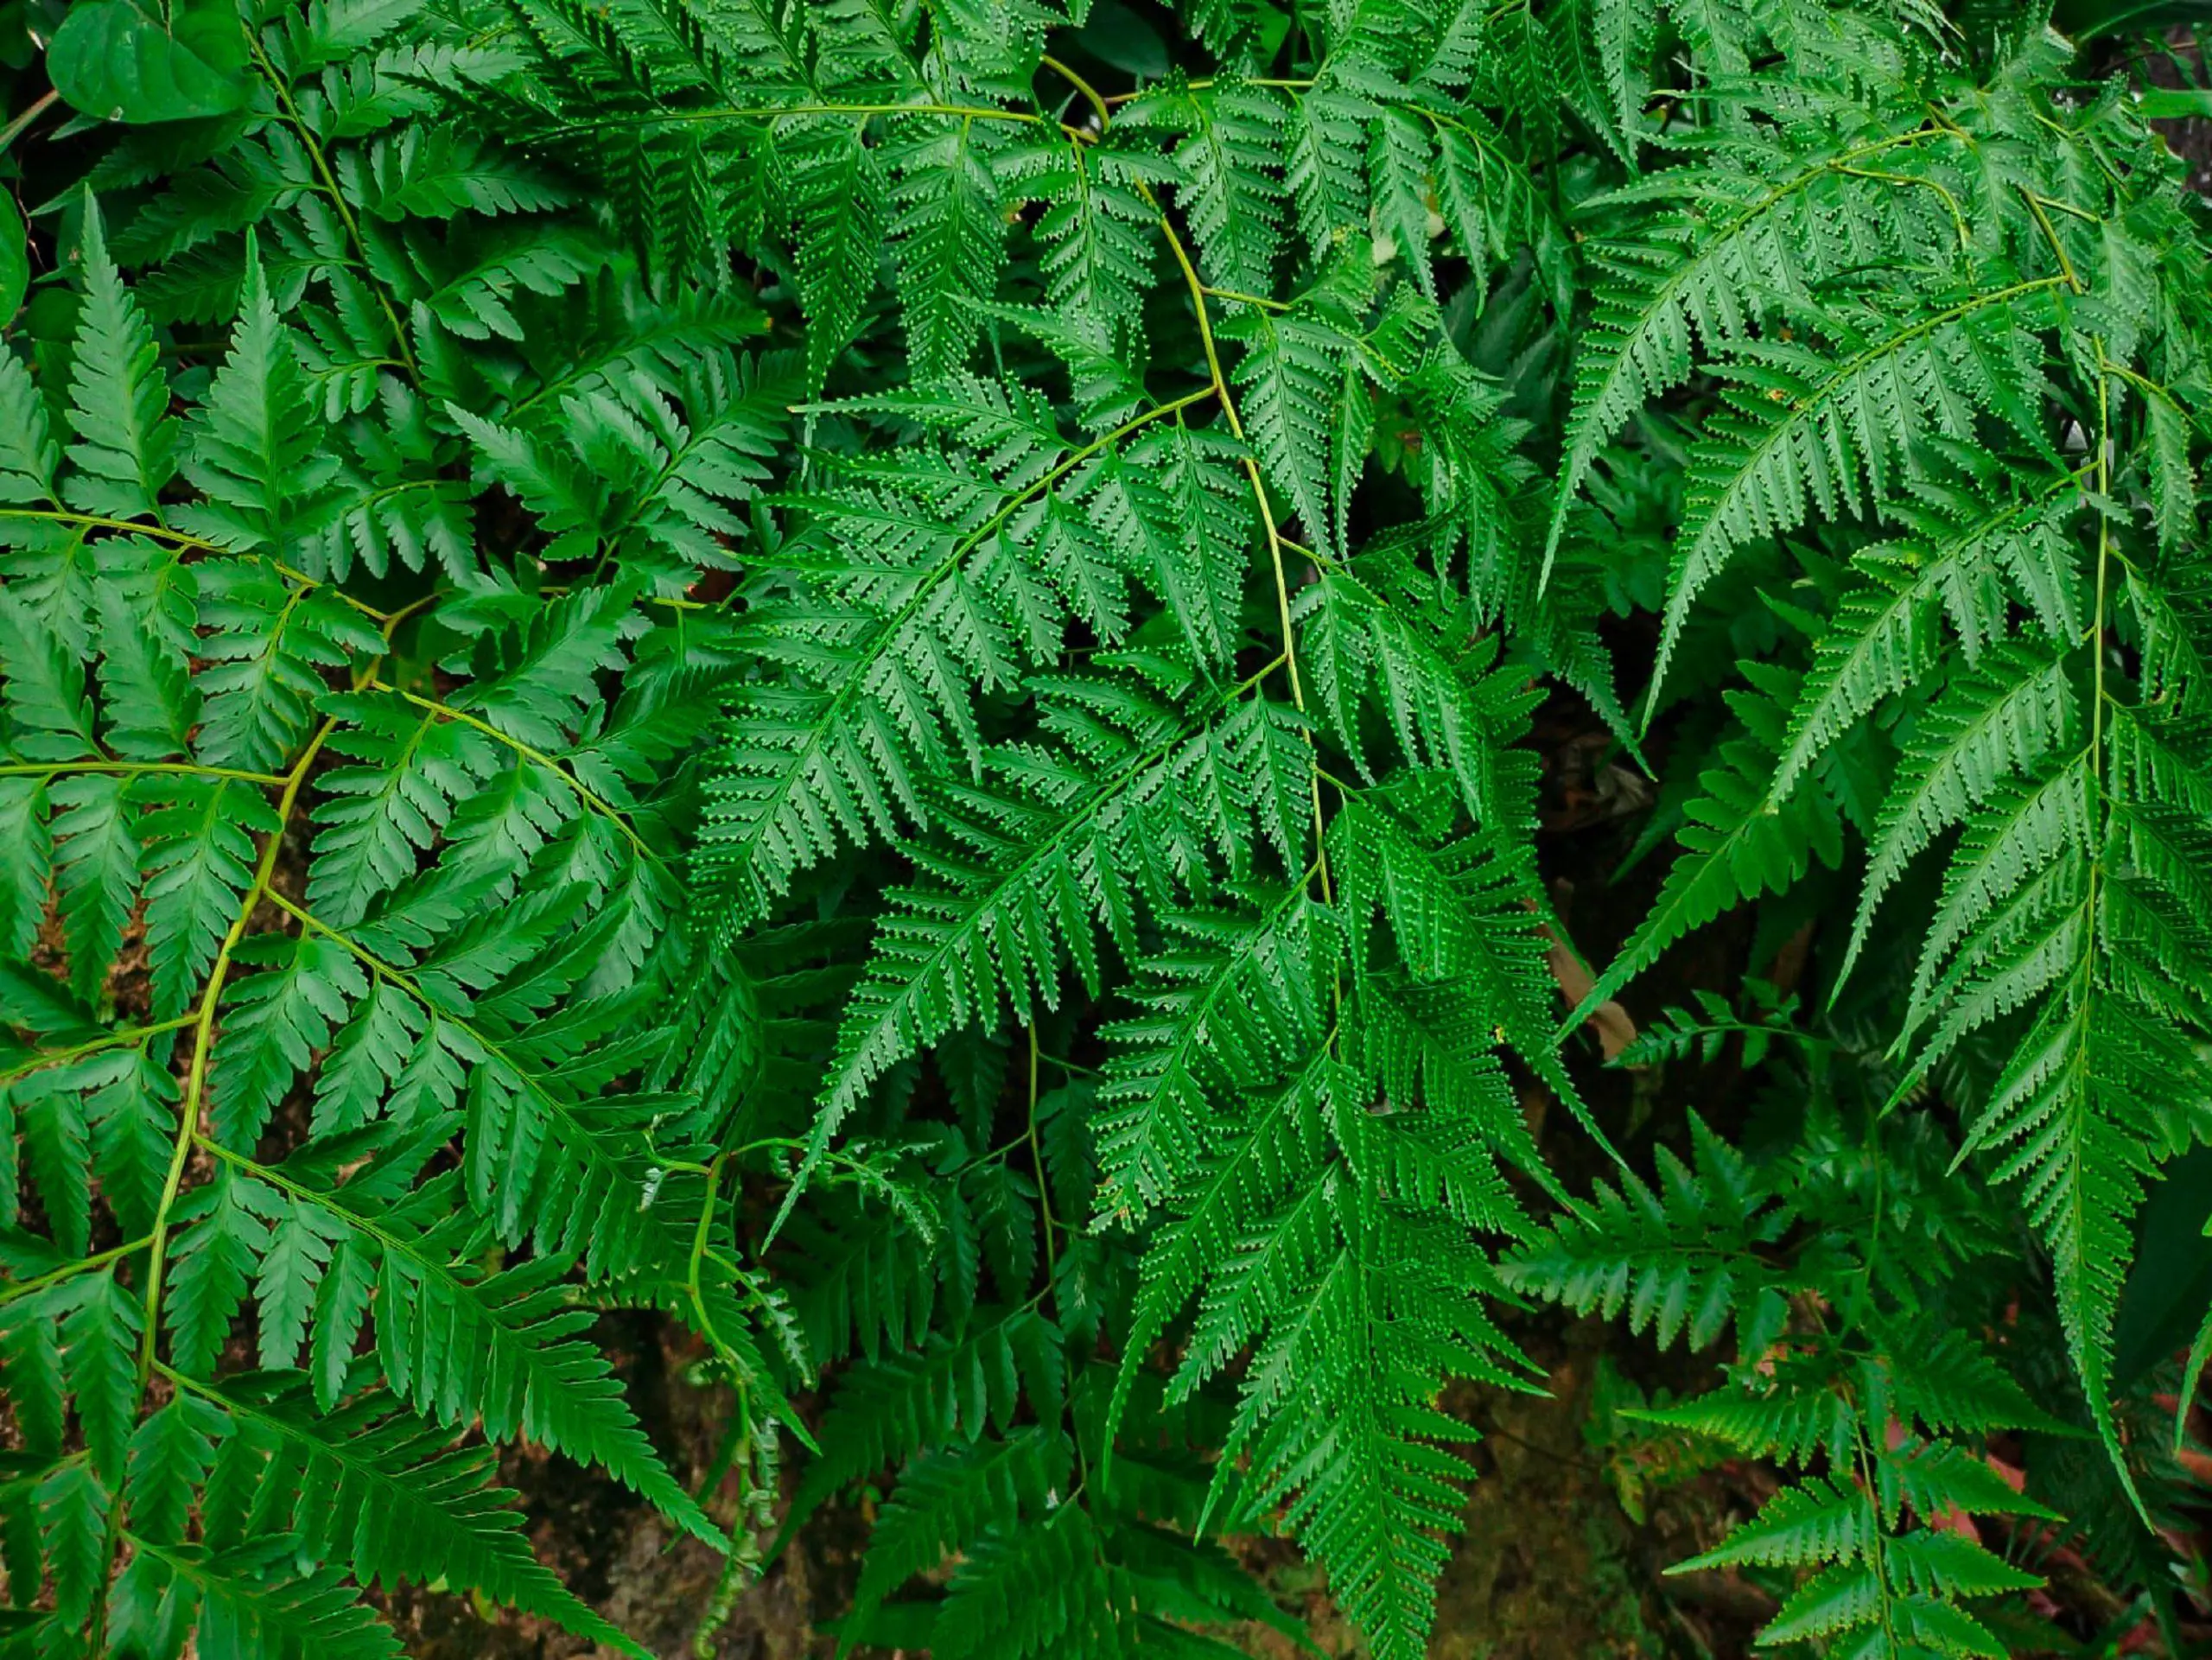 Ferns thrive on borders embankments and trails